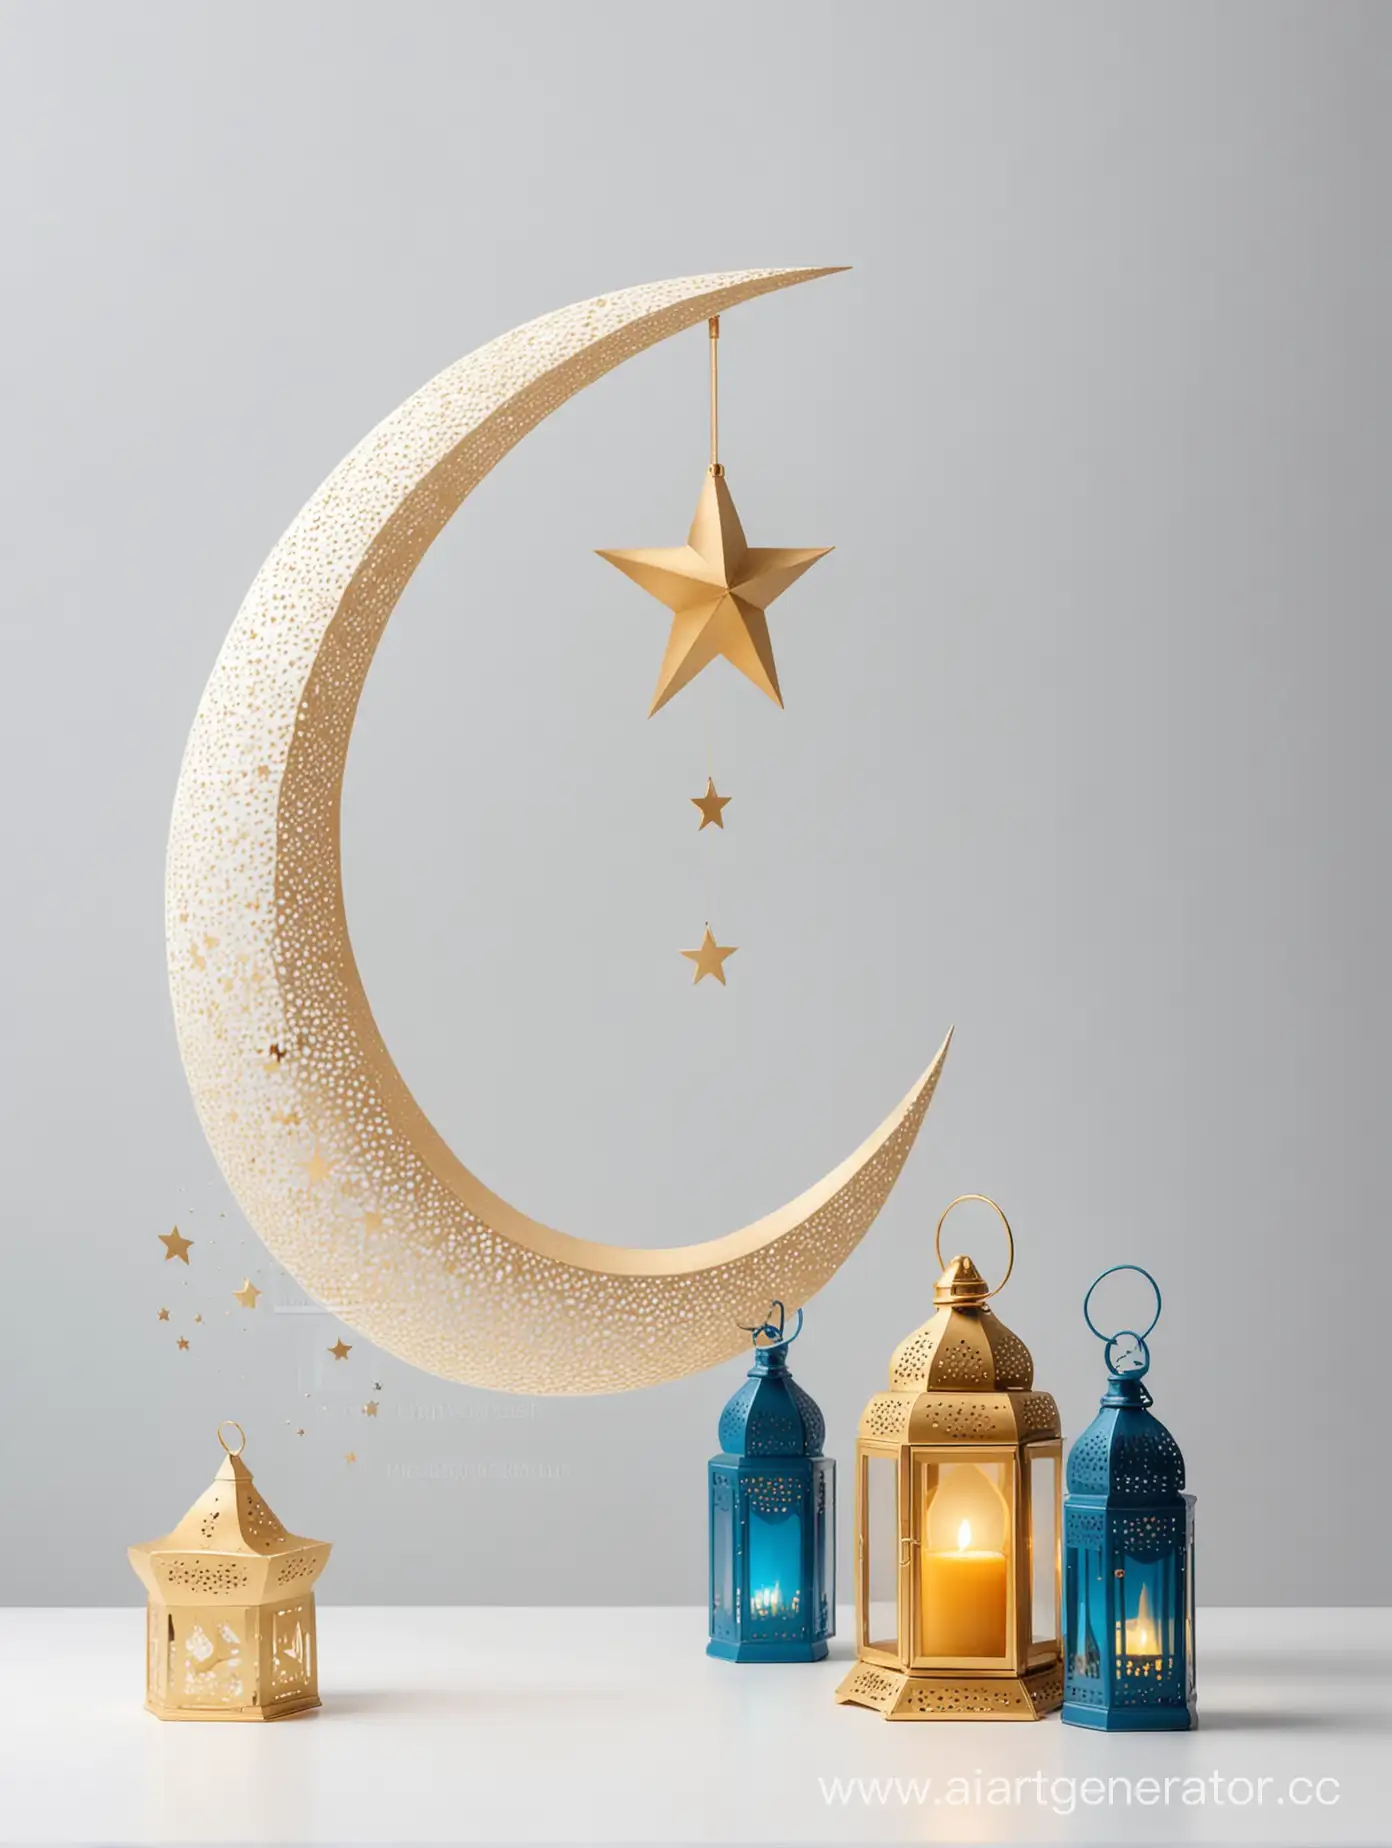 Modern-Islamic-Ramadan-Moon-Star-and-Lantern-Concept-in-Golden-and-Blue-on-White-Background